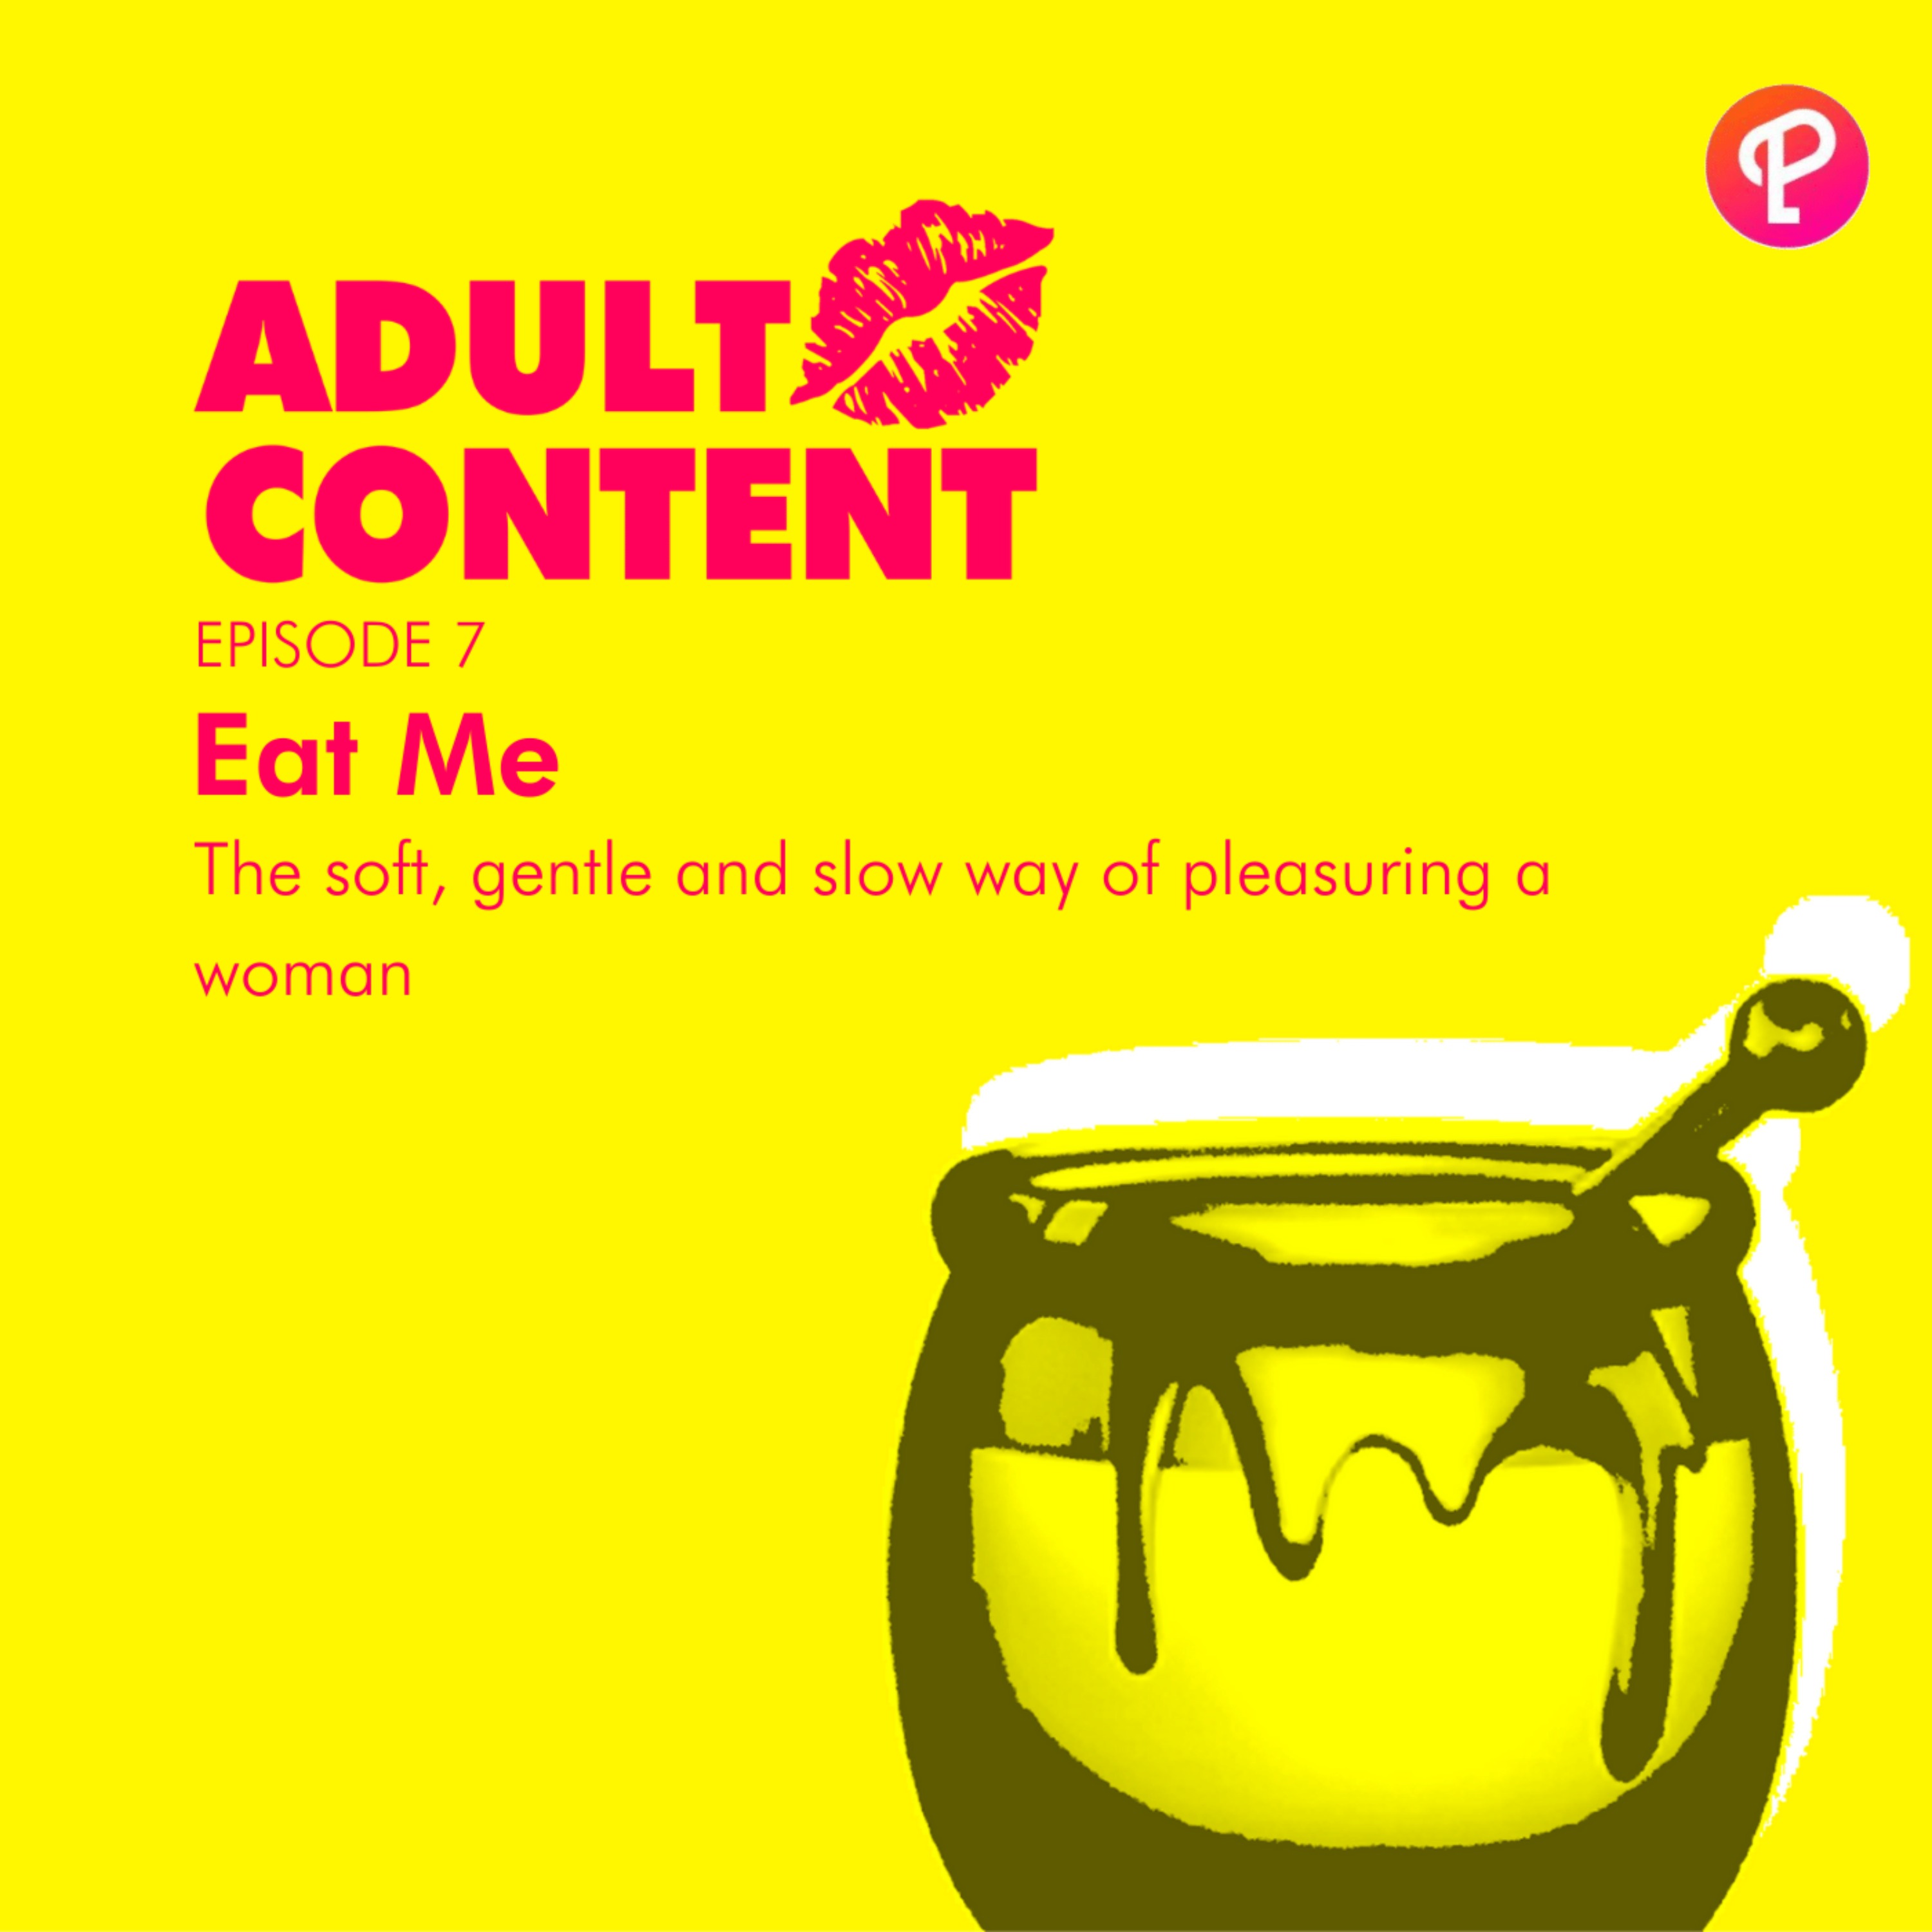 Ep. 7: Eat Me: The soft, gentle and slow way of pleasuring a woman